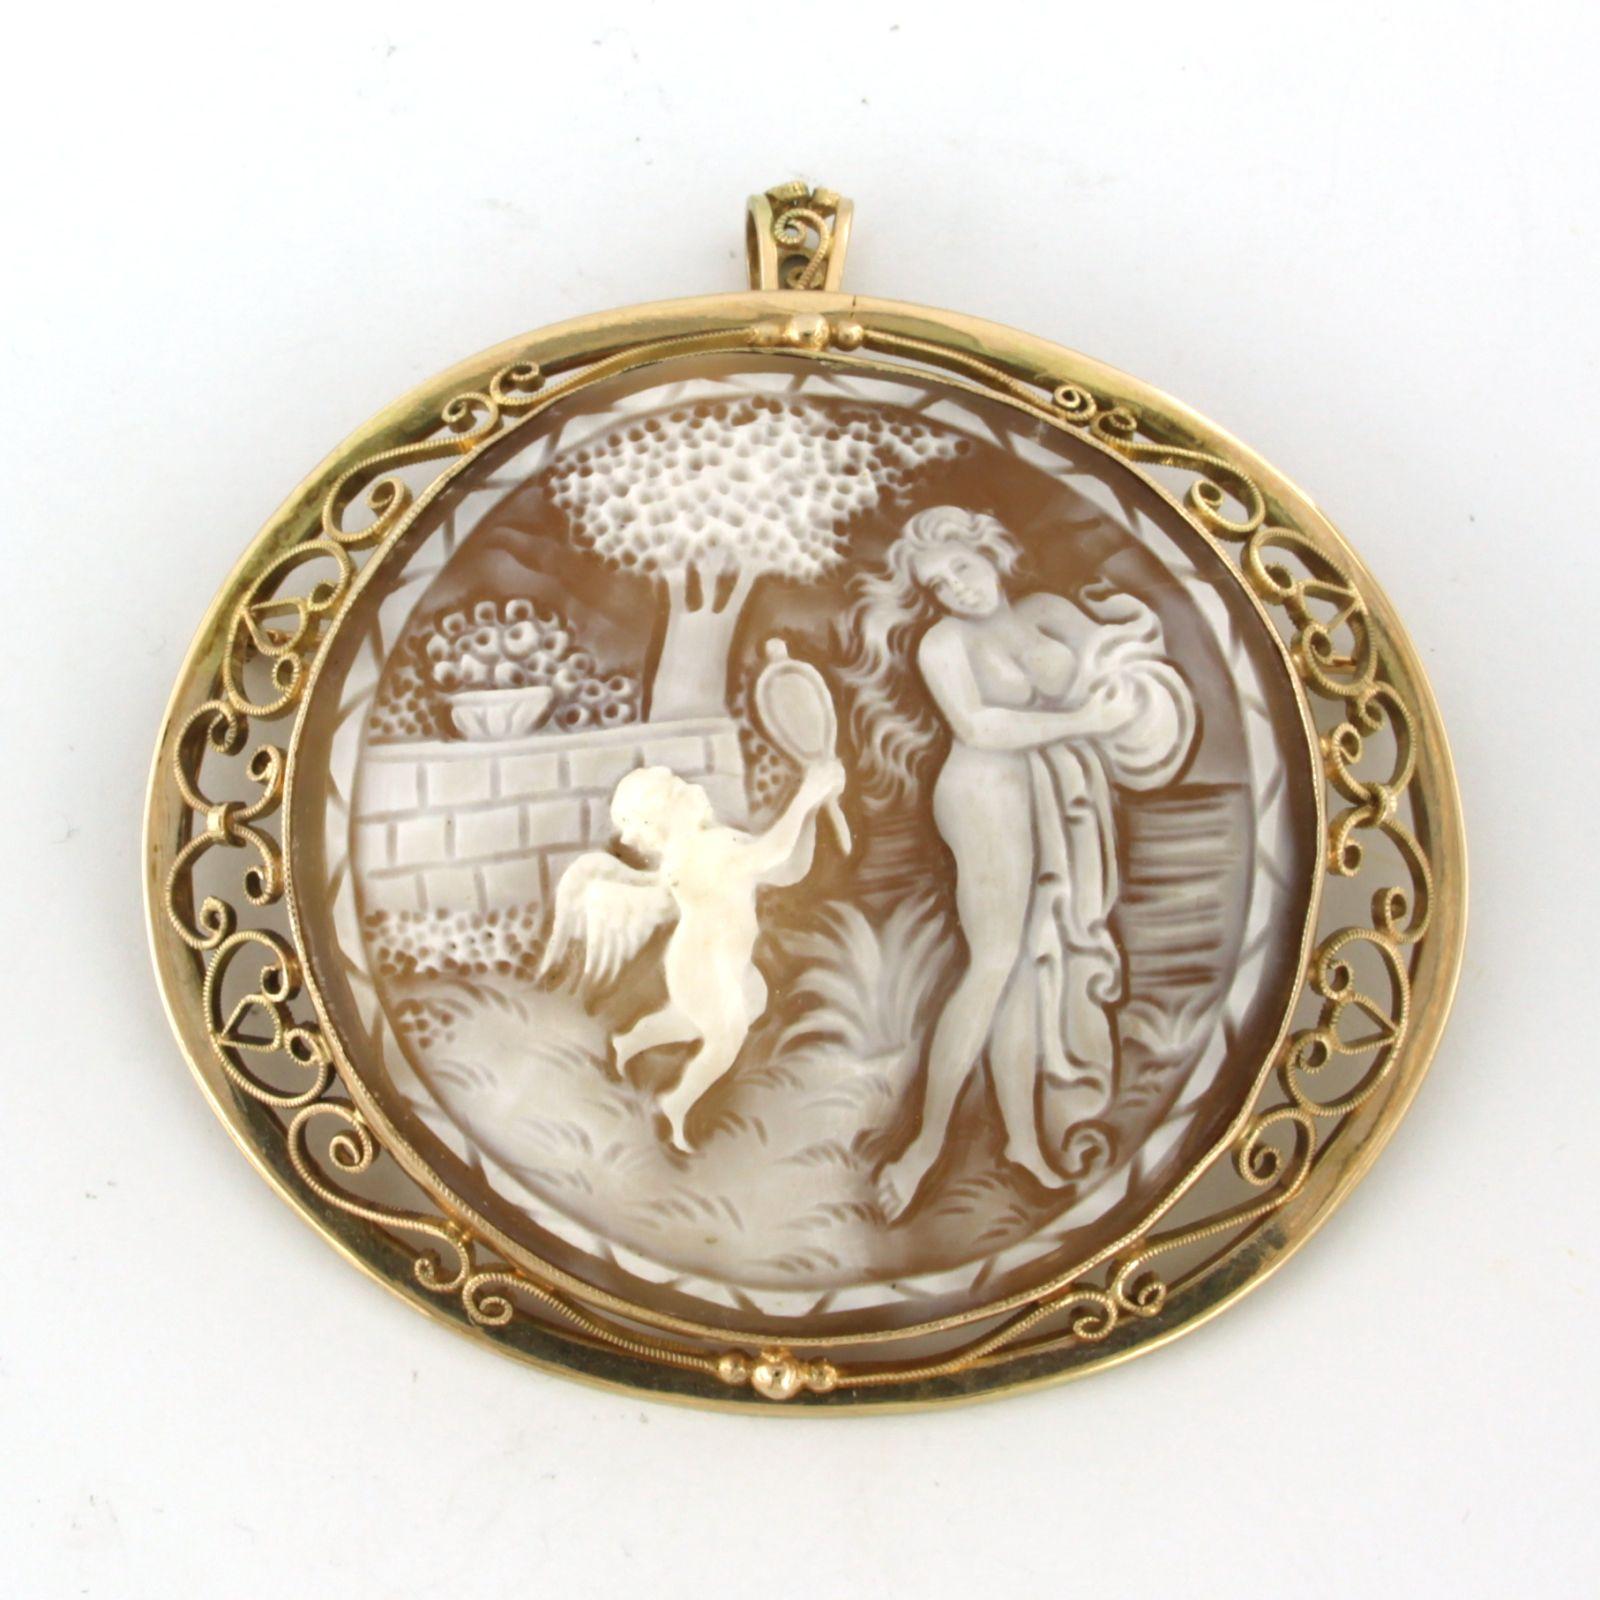 14k yellow gold cameo brooch/pendant – size 6.4 cm x 6.6 cm

Detailed description

the size of the brooch/pendant is 6.4 cm long by 6.6 cm wide

weight 29.8 grams

set with

- 1 x 4.9 mm x 4.7 mm oval cut cameo

Color brown/white
Purity….
Gemstones